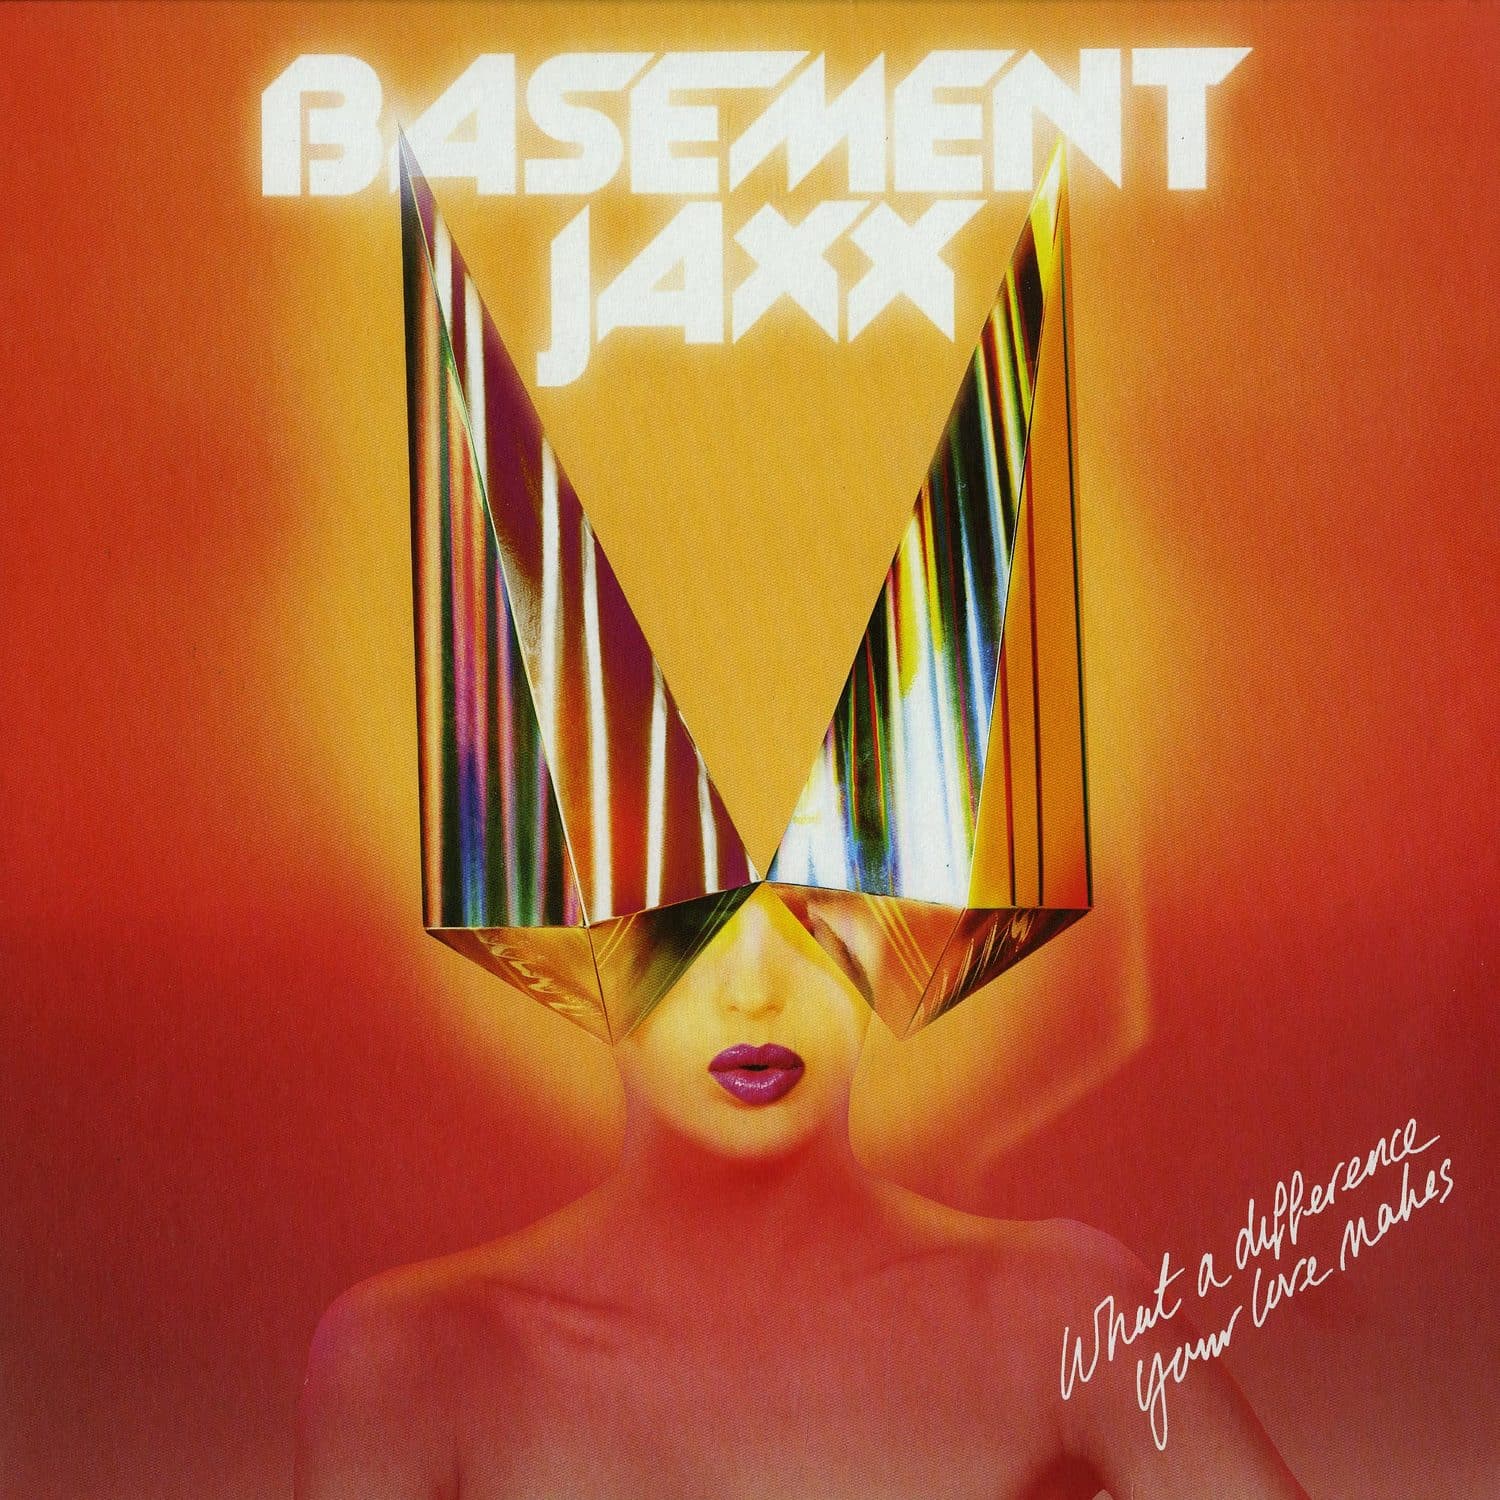 Basement Jaxx - WHAT A DIFFERENCE / BACK 2 THE WILD 